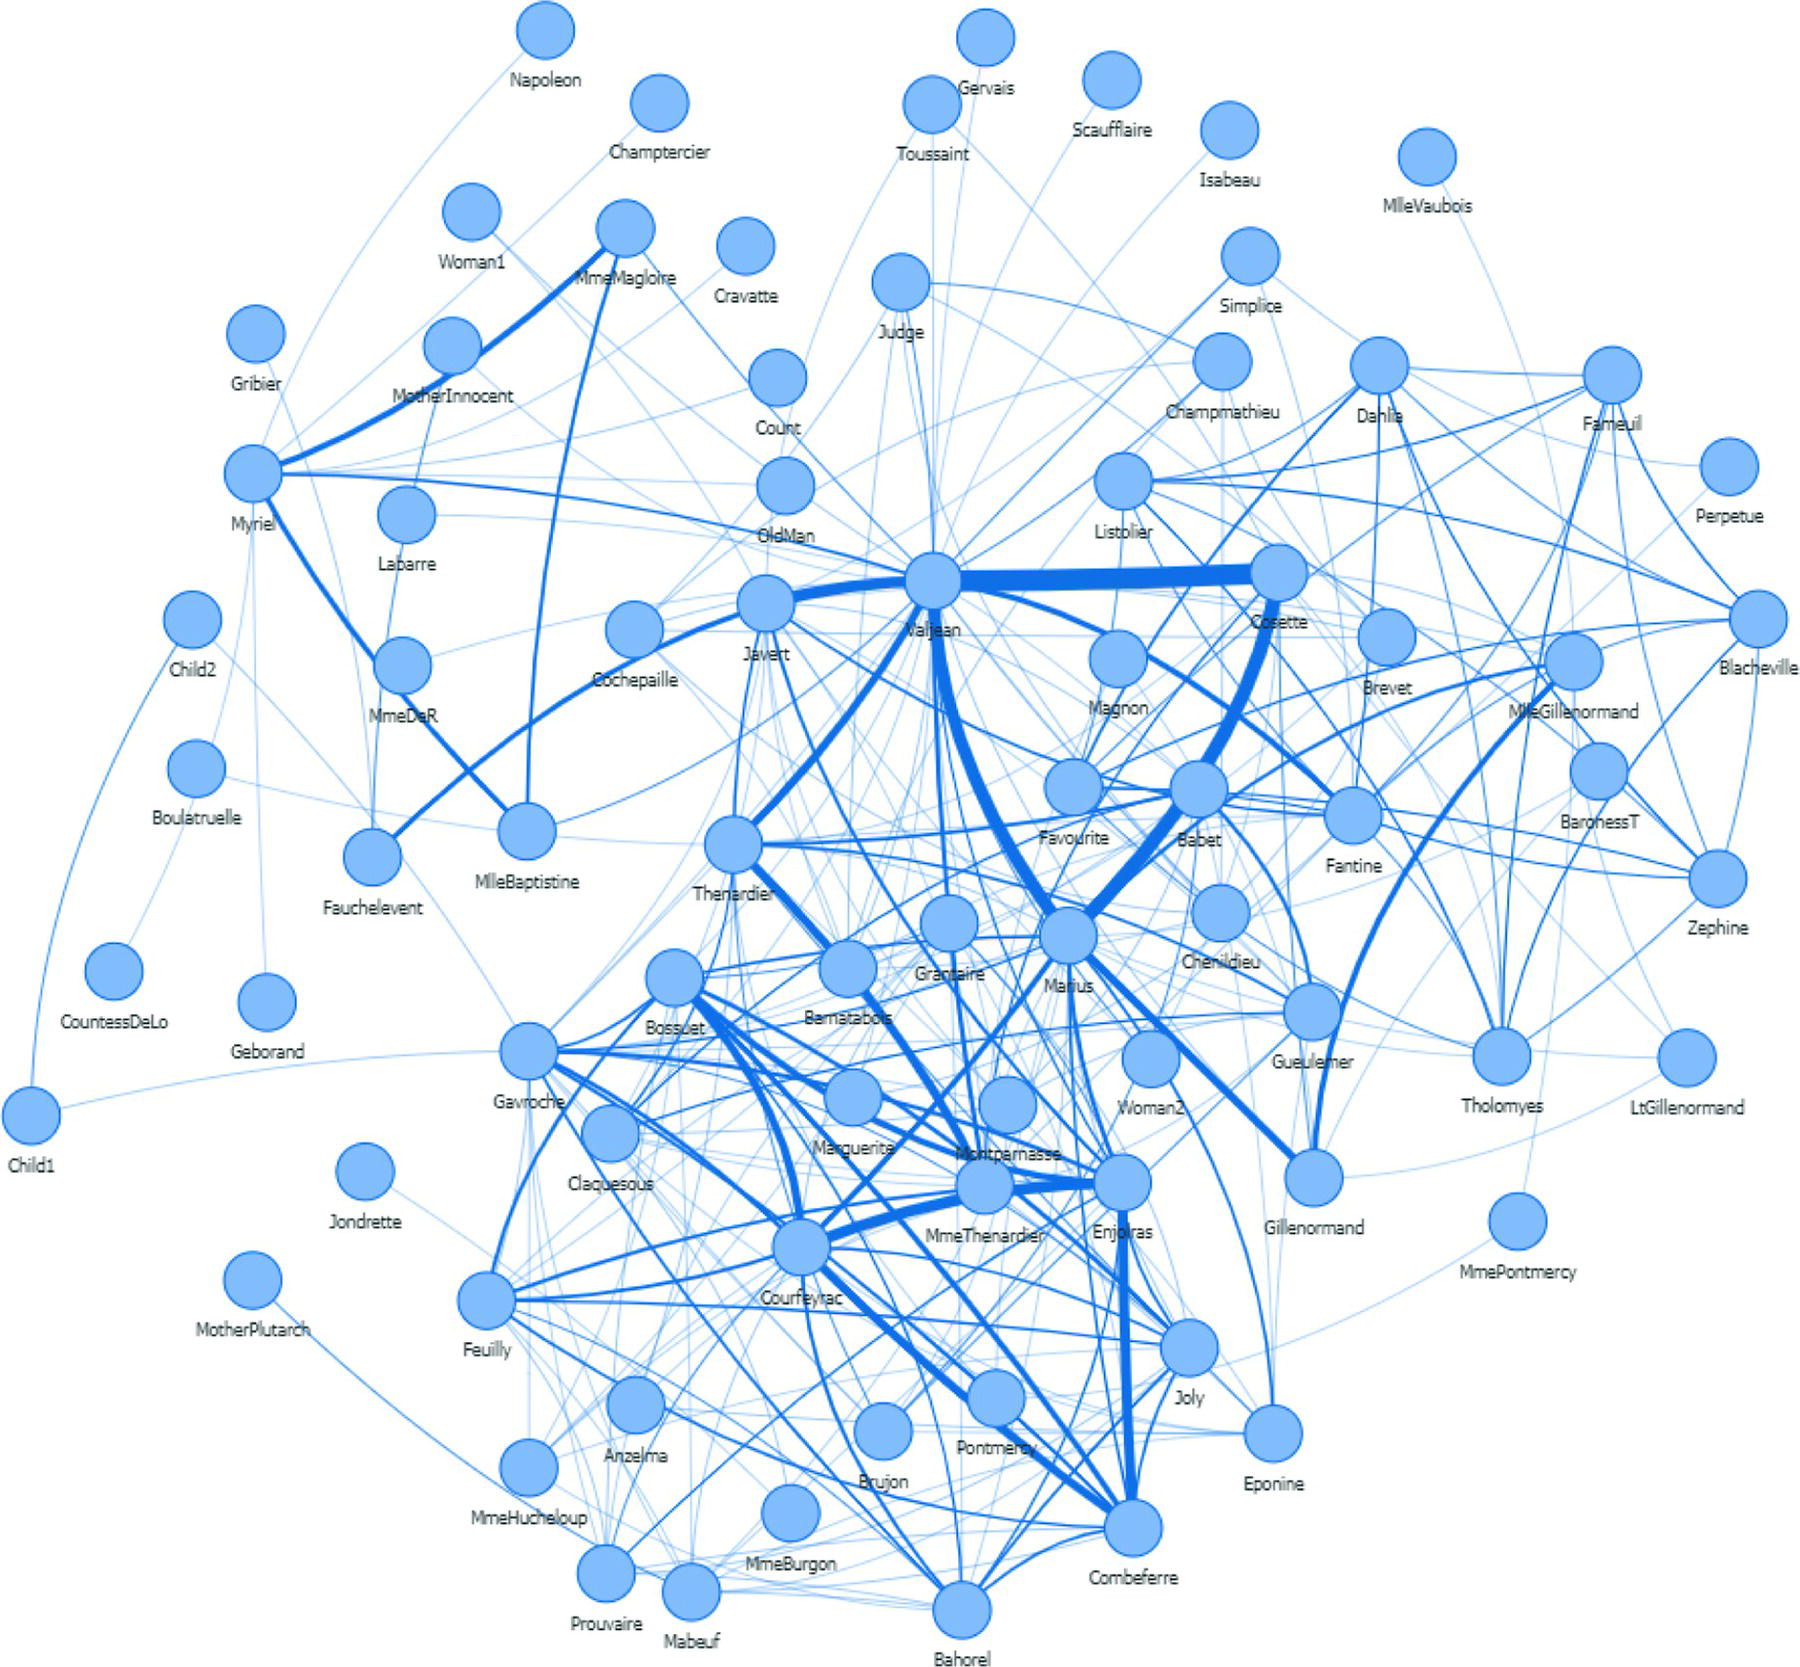 Screenshot of undirected graph based on the French movie Les Miserable.